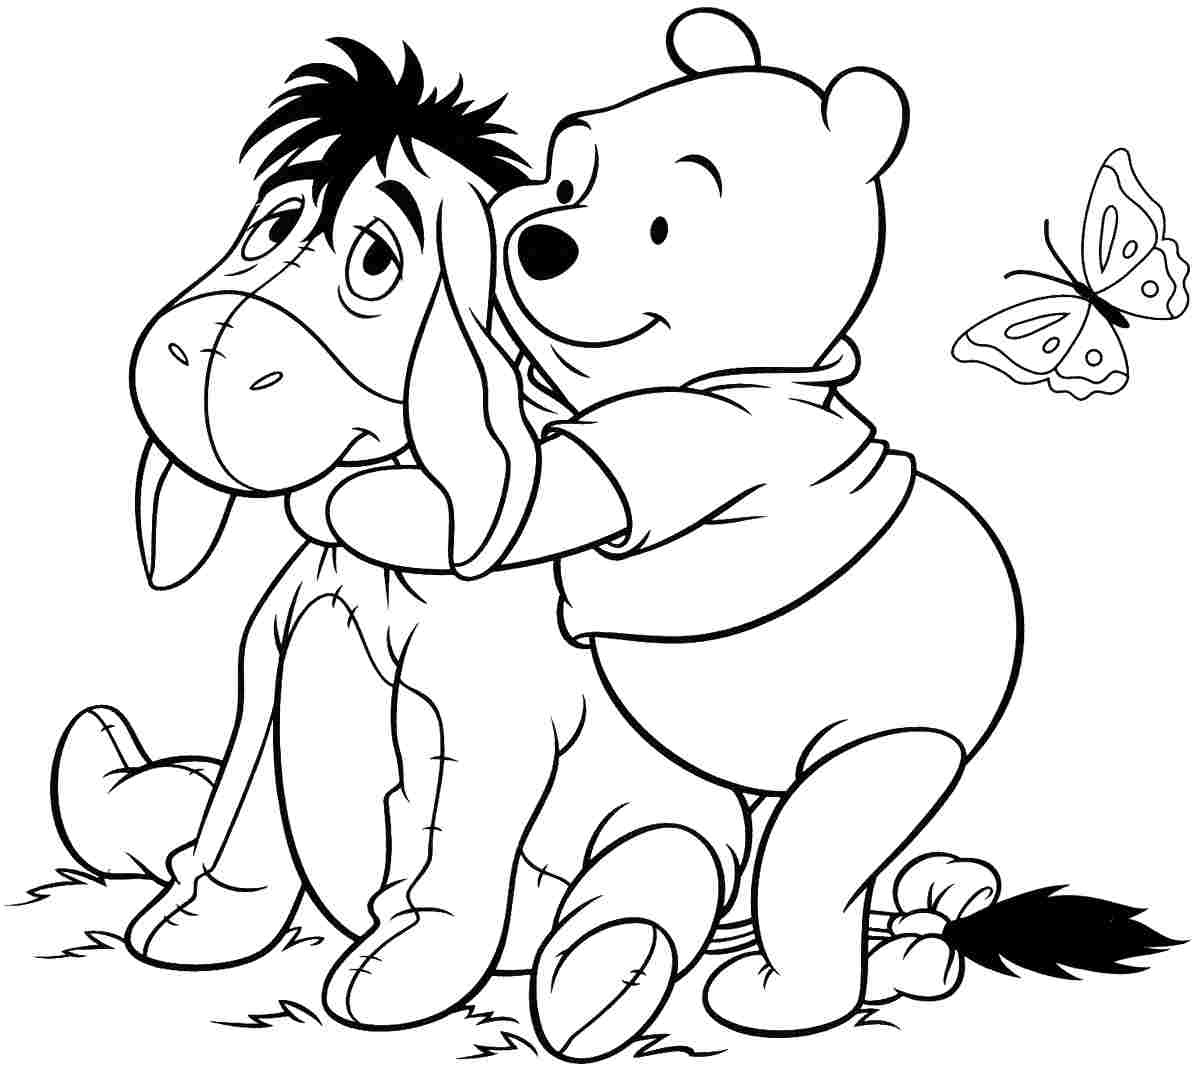 winnie-the-pooh-pictures-coloring-sheets-free-printables